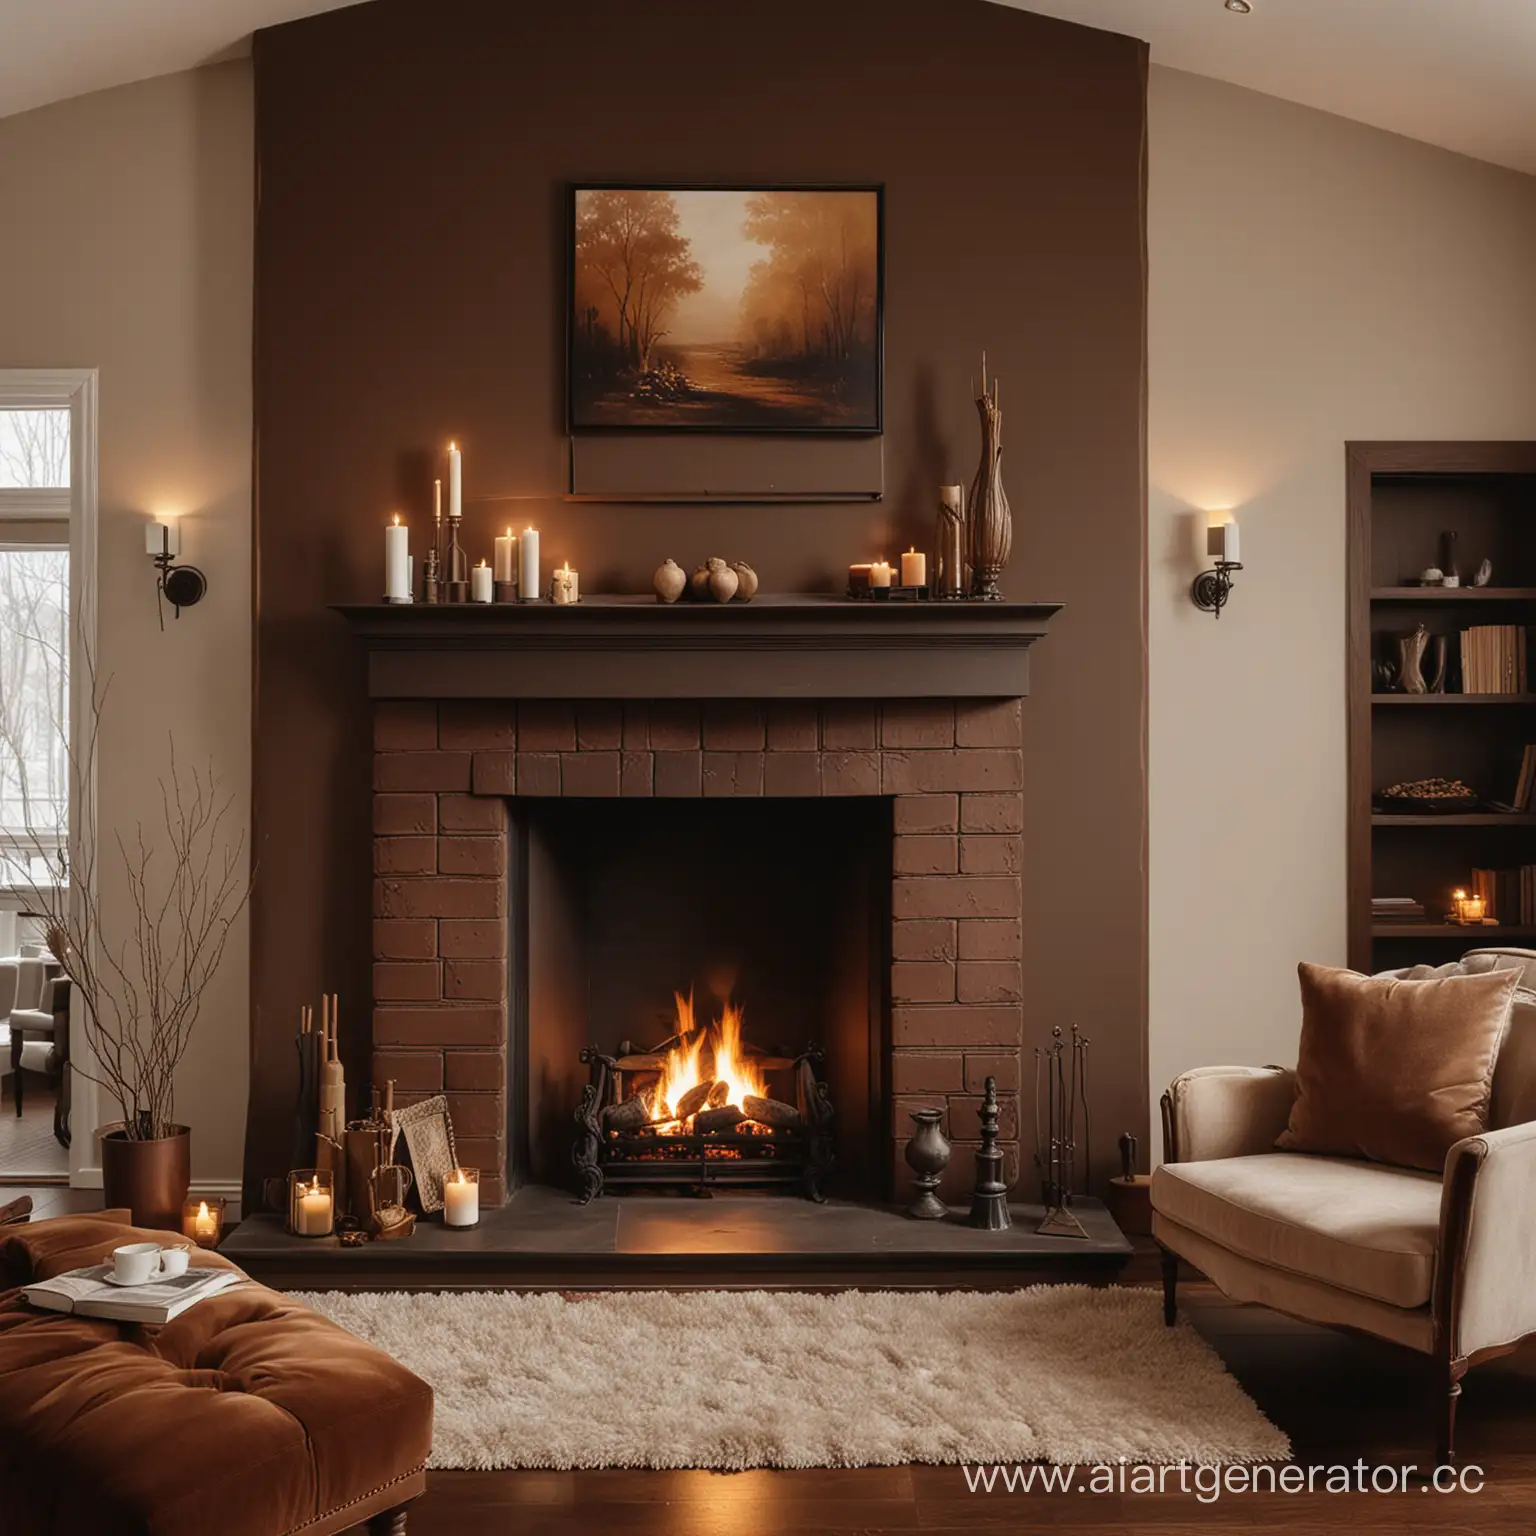 Luxurious-Home-Fireplace-Scene-with-Chocolate-Tones-and-Passionate-Ambiance